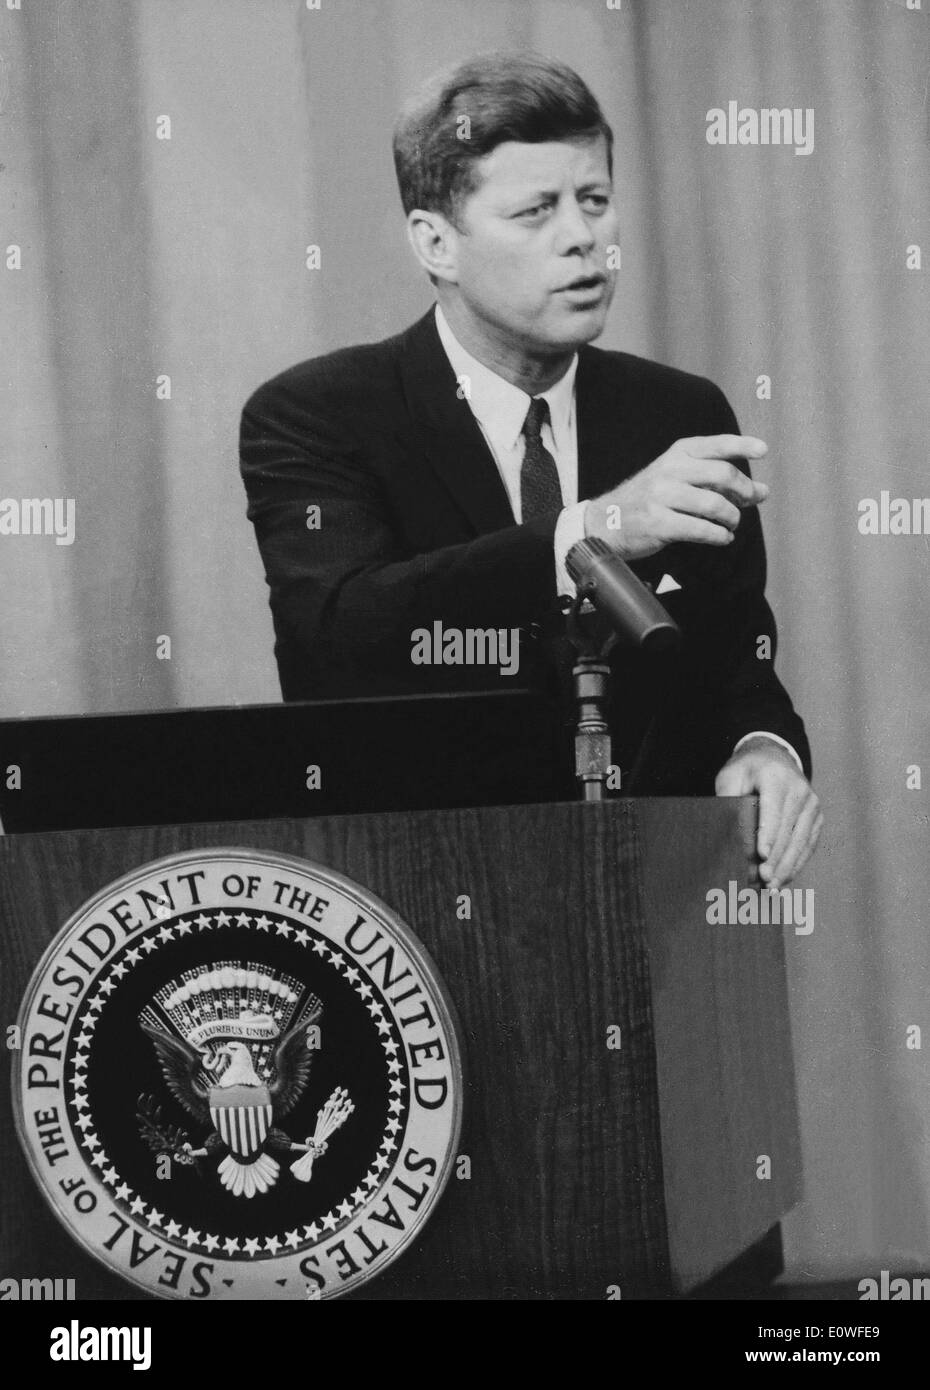 President Kennedy at a press conference in Washington Stock Photo